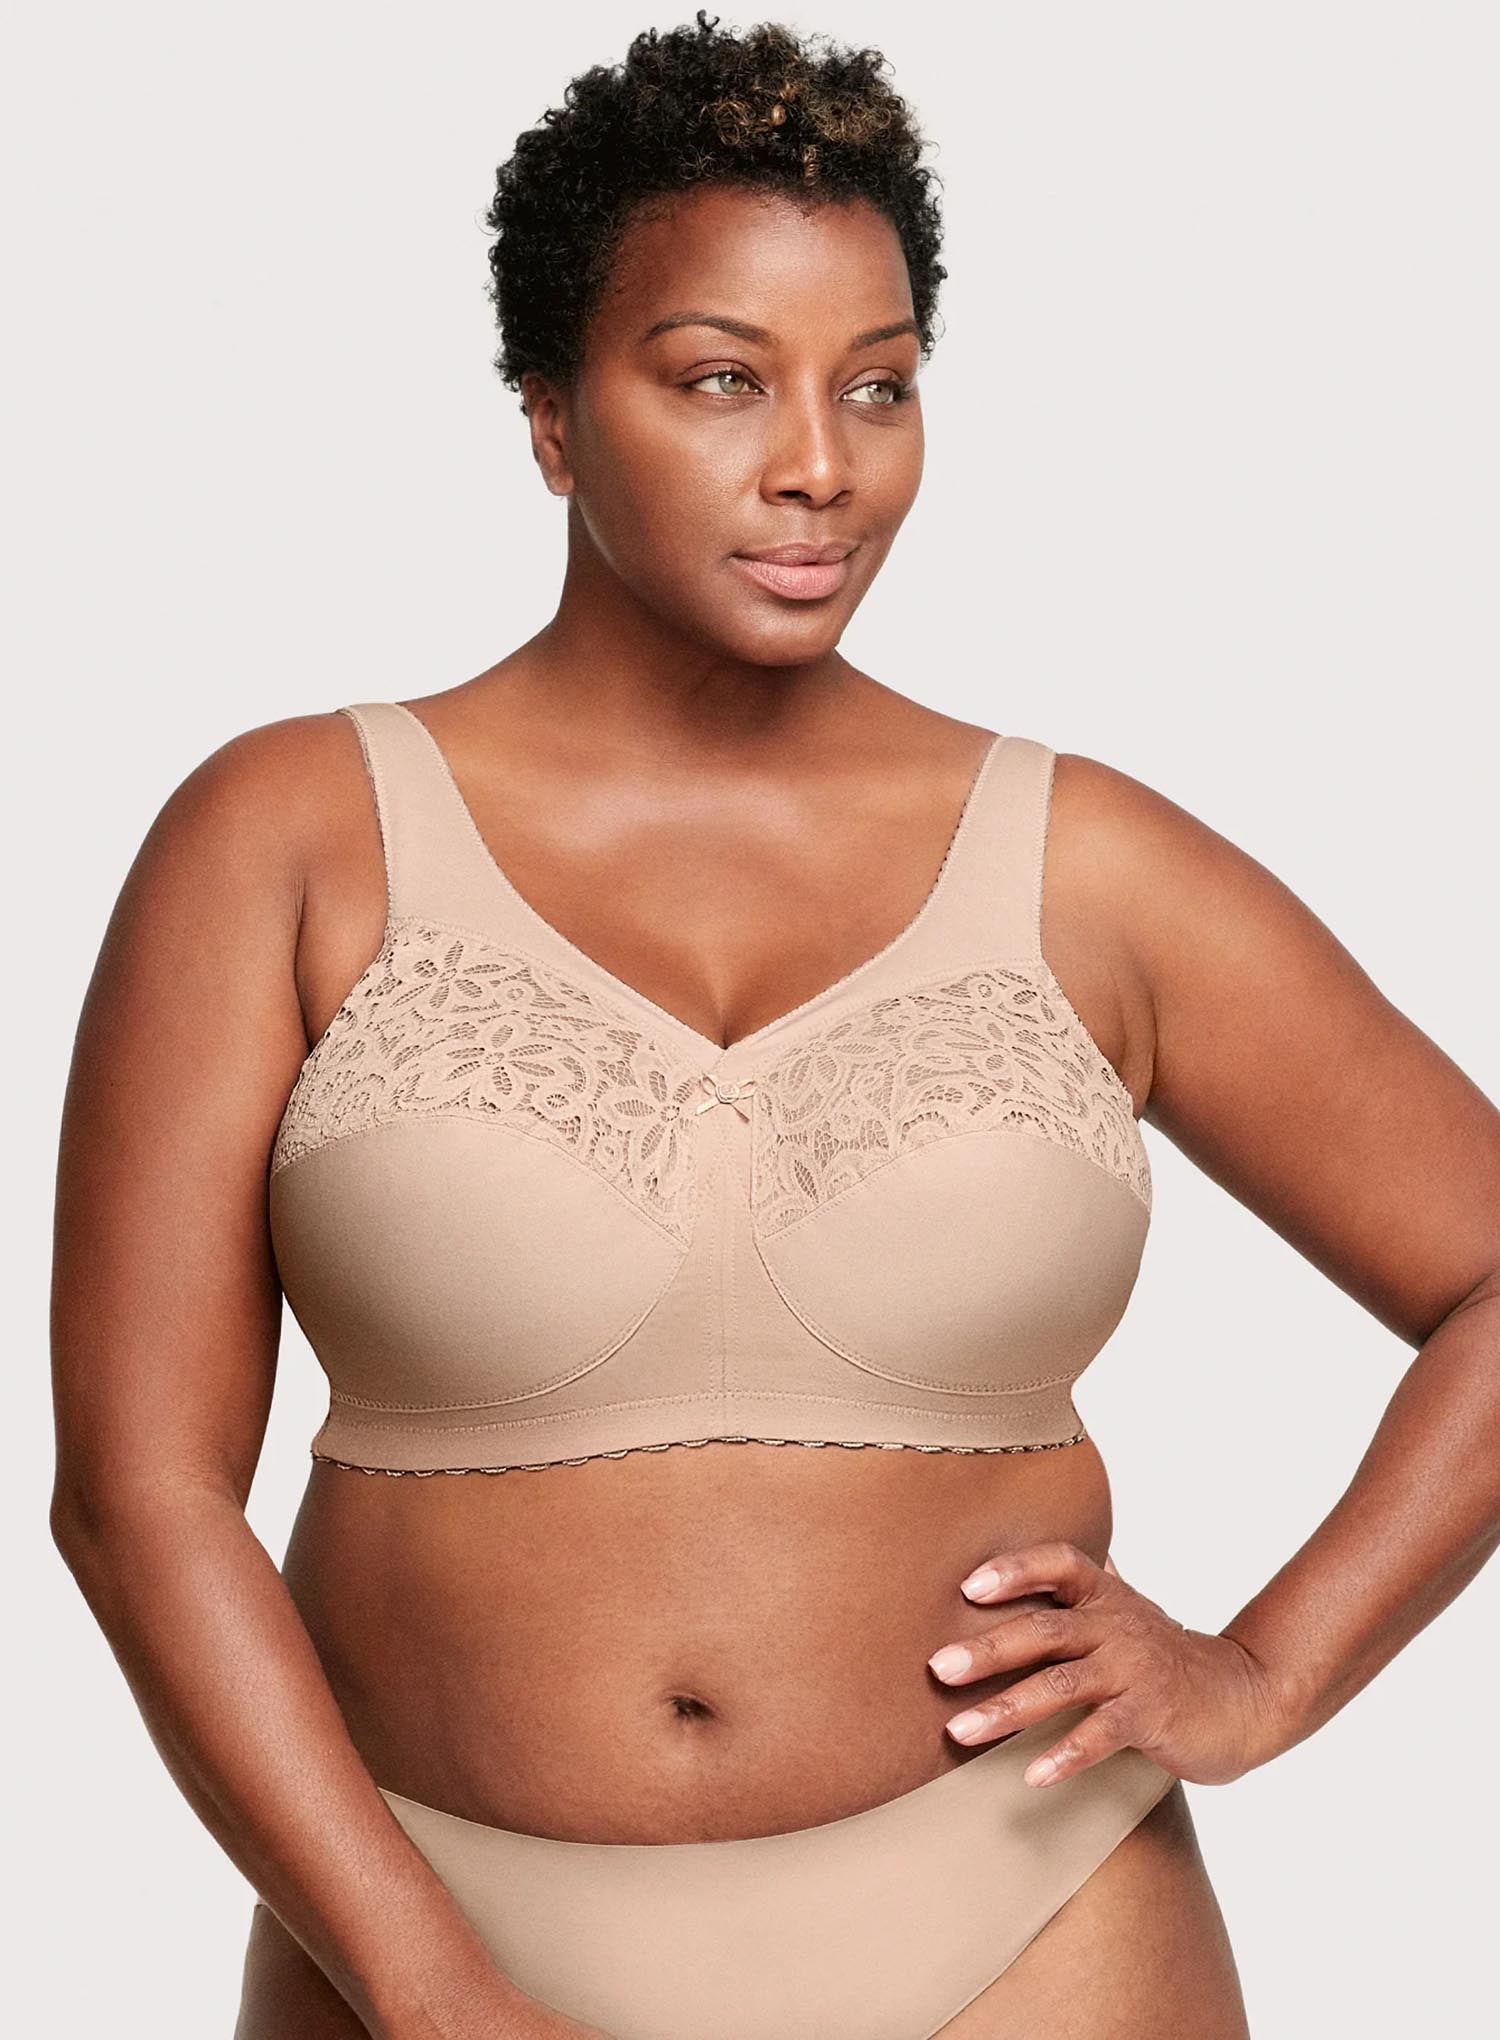 Buy Freestanding bra fitting stores with Custom Designs 